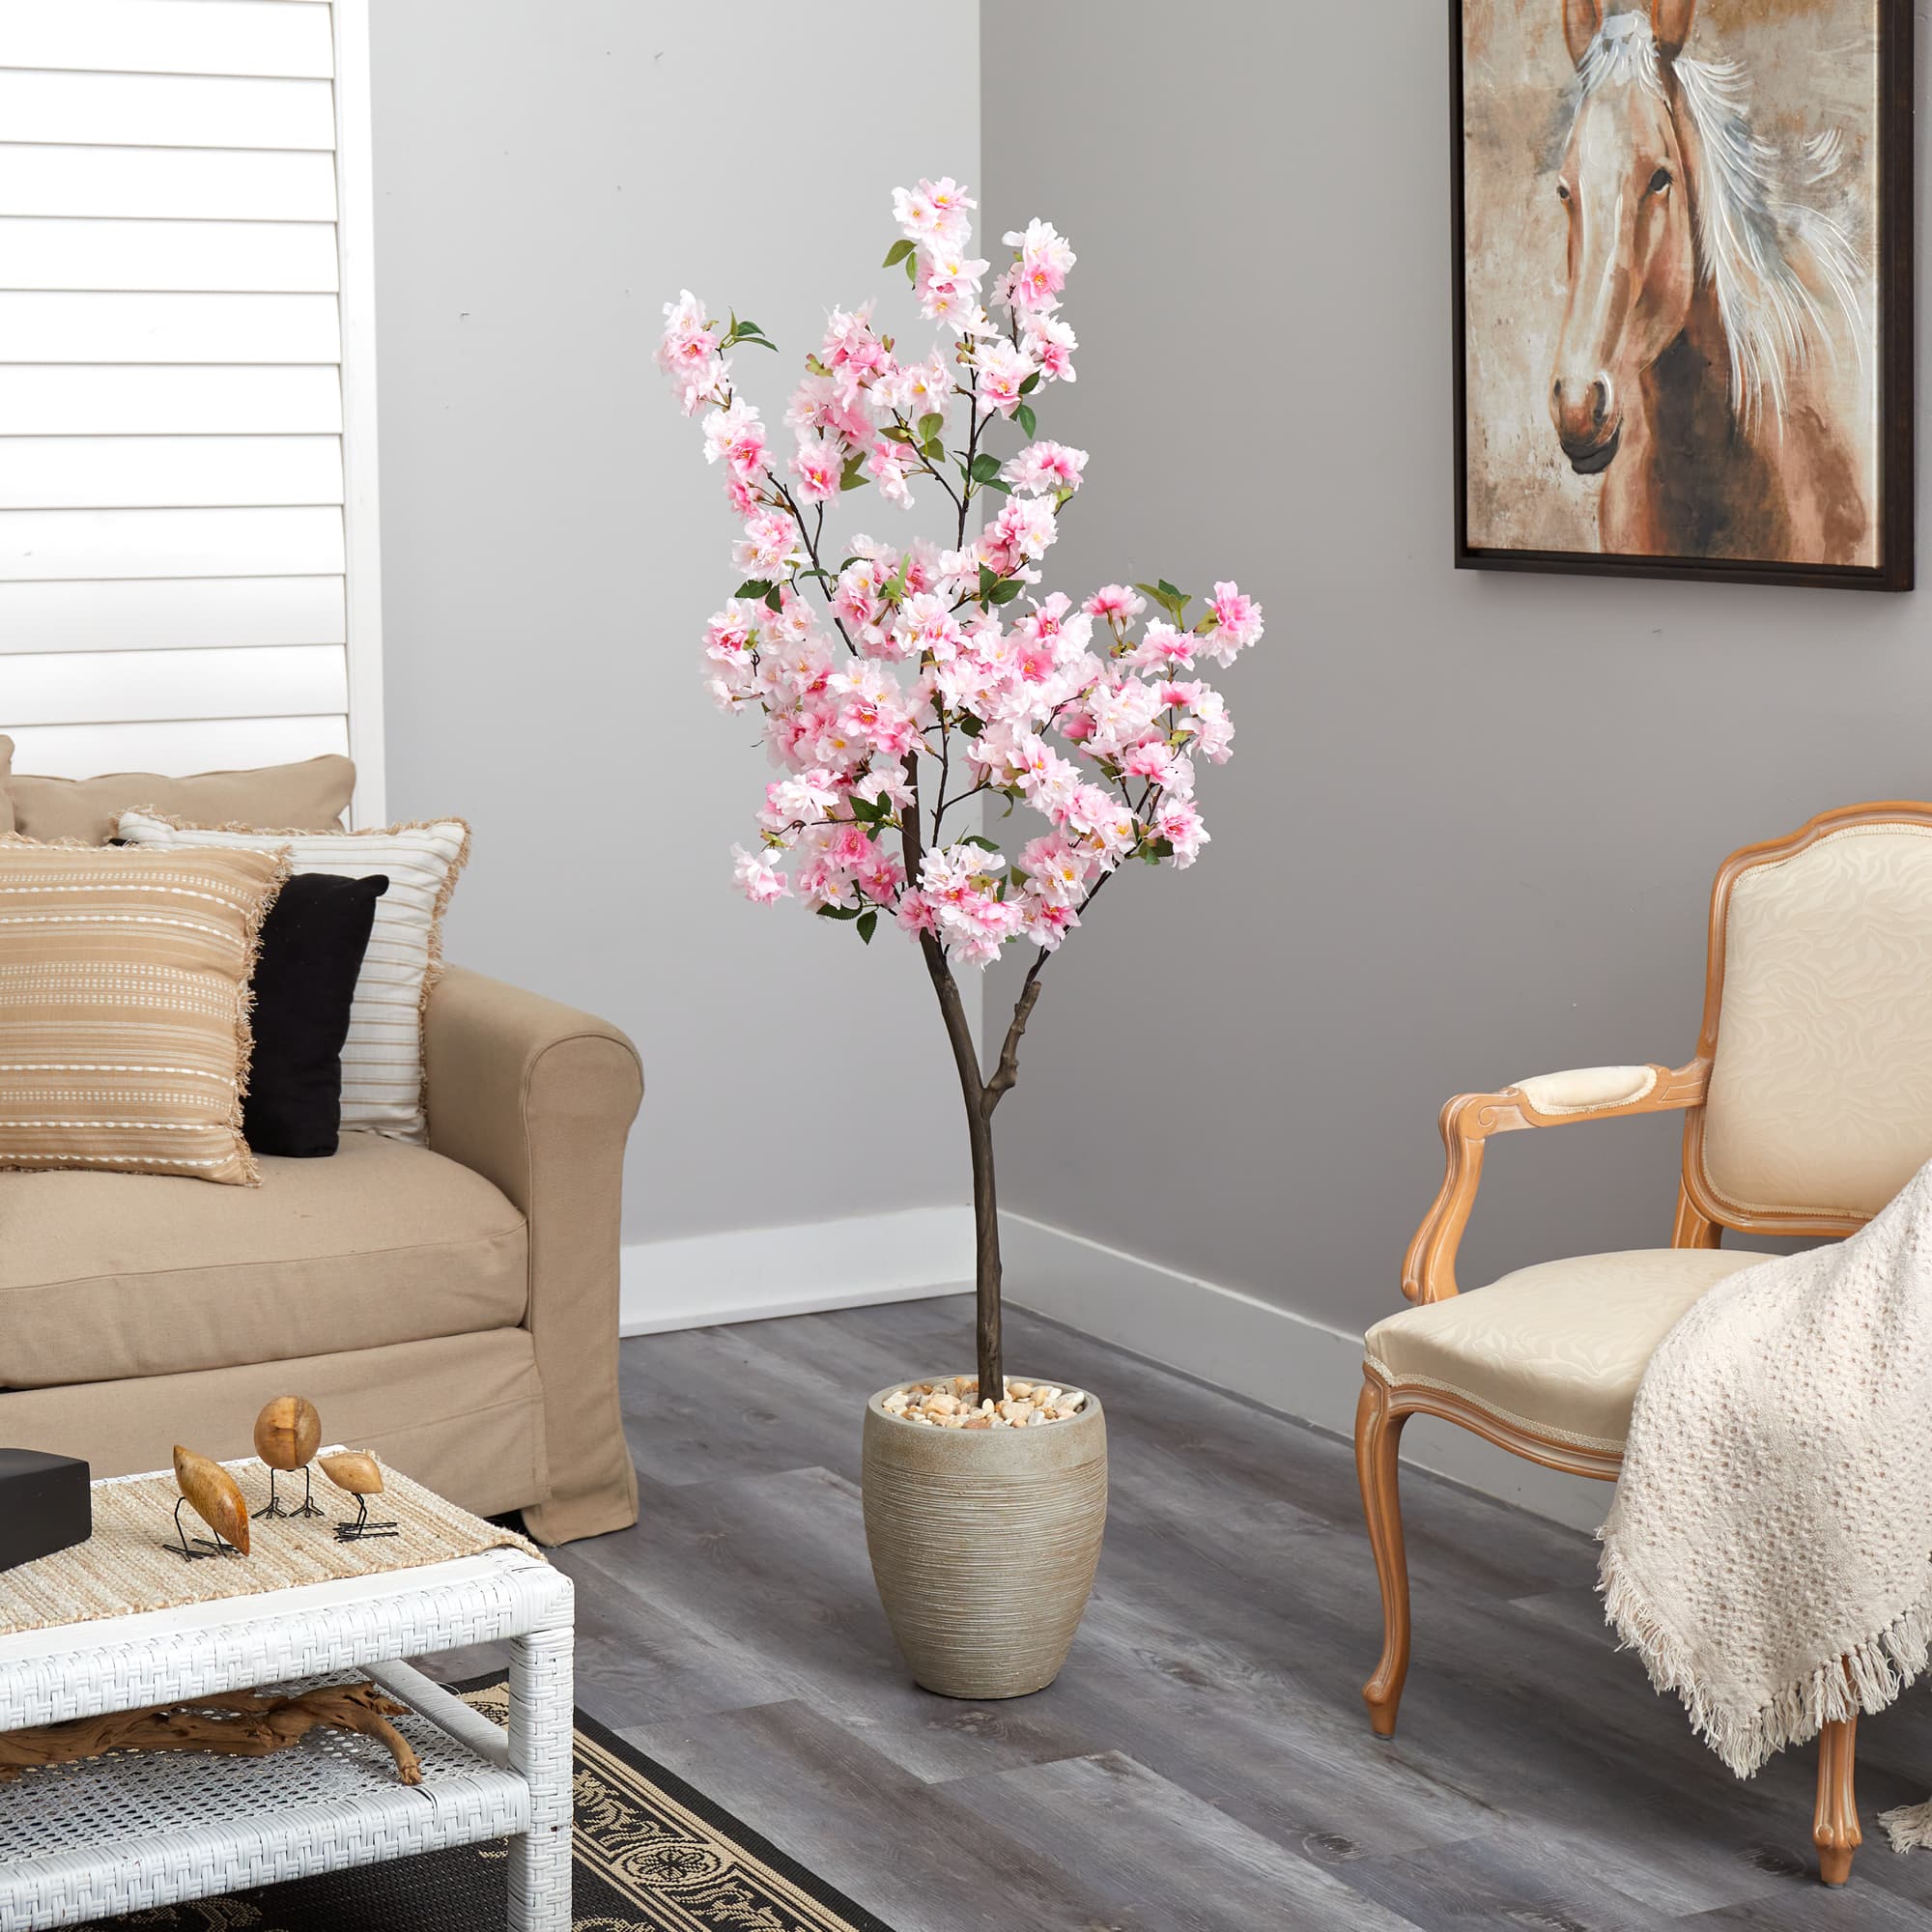 5.5ft. Cherry Blossom Tree in Sand Colored Planter